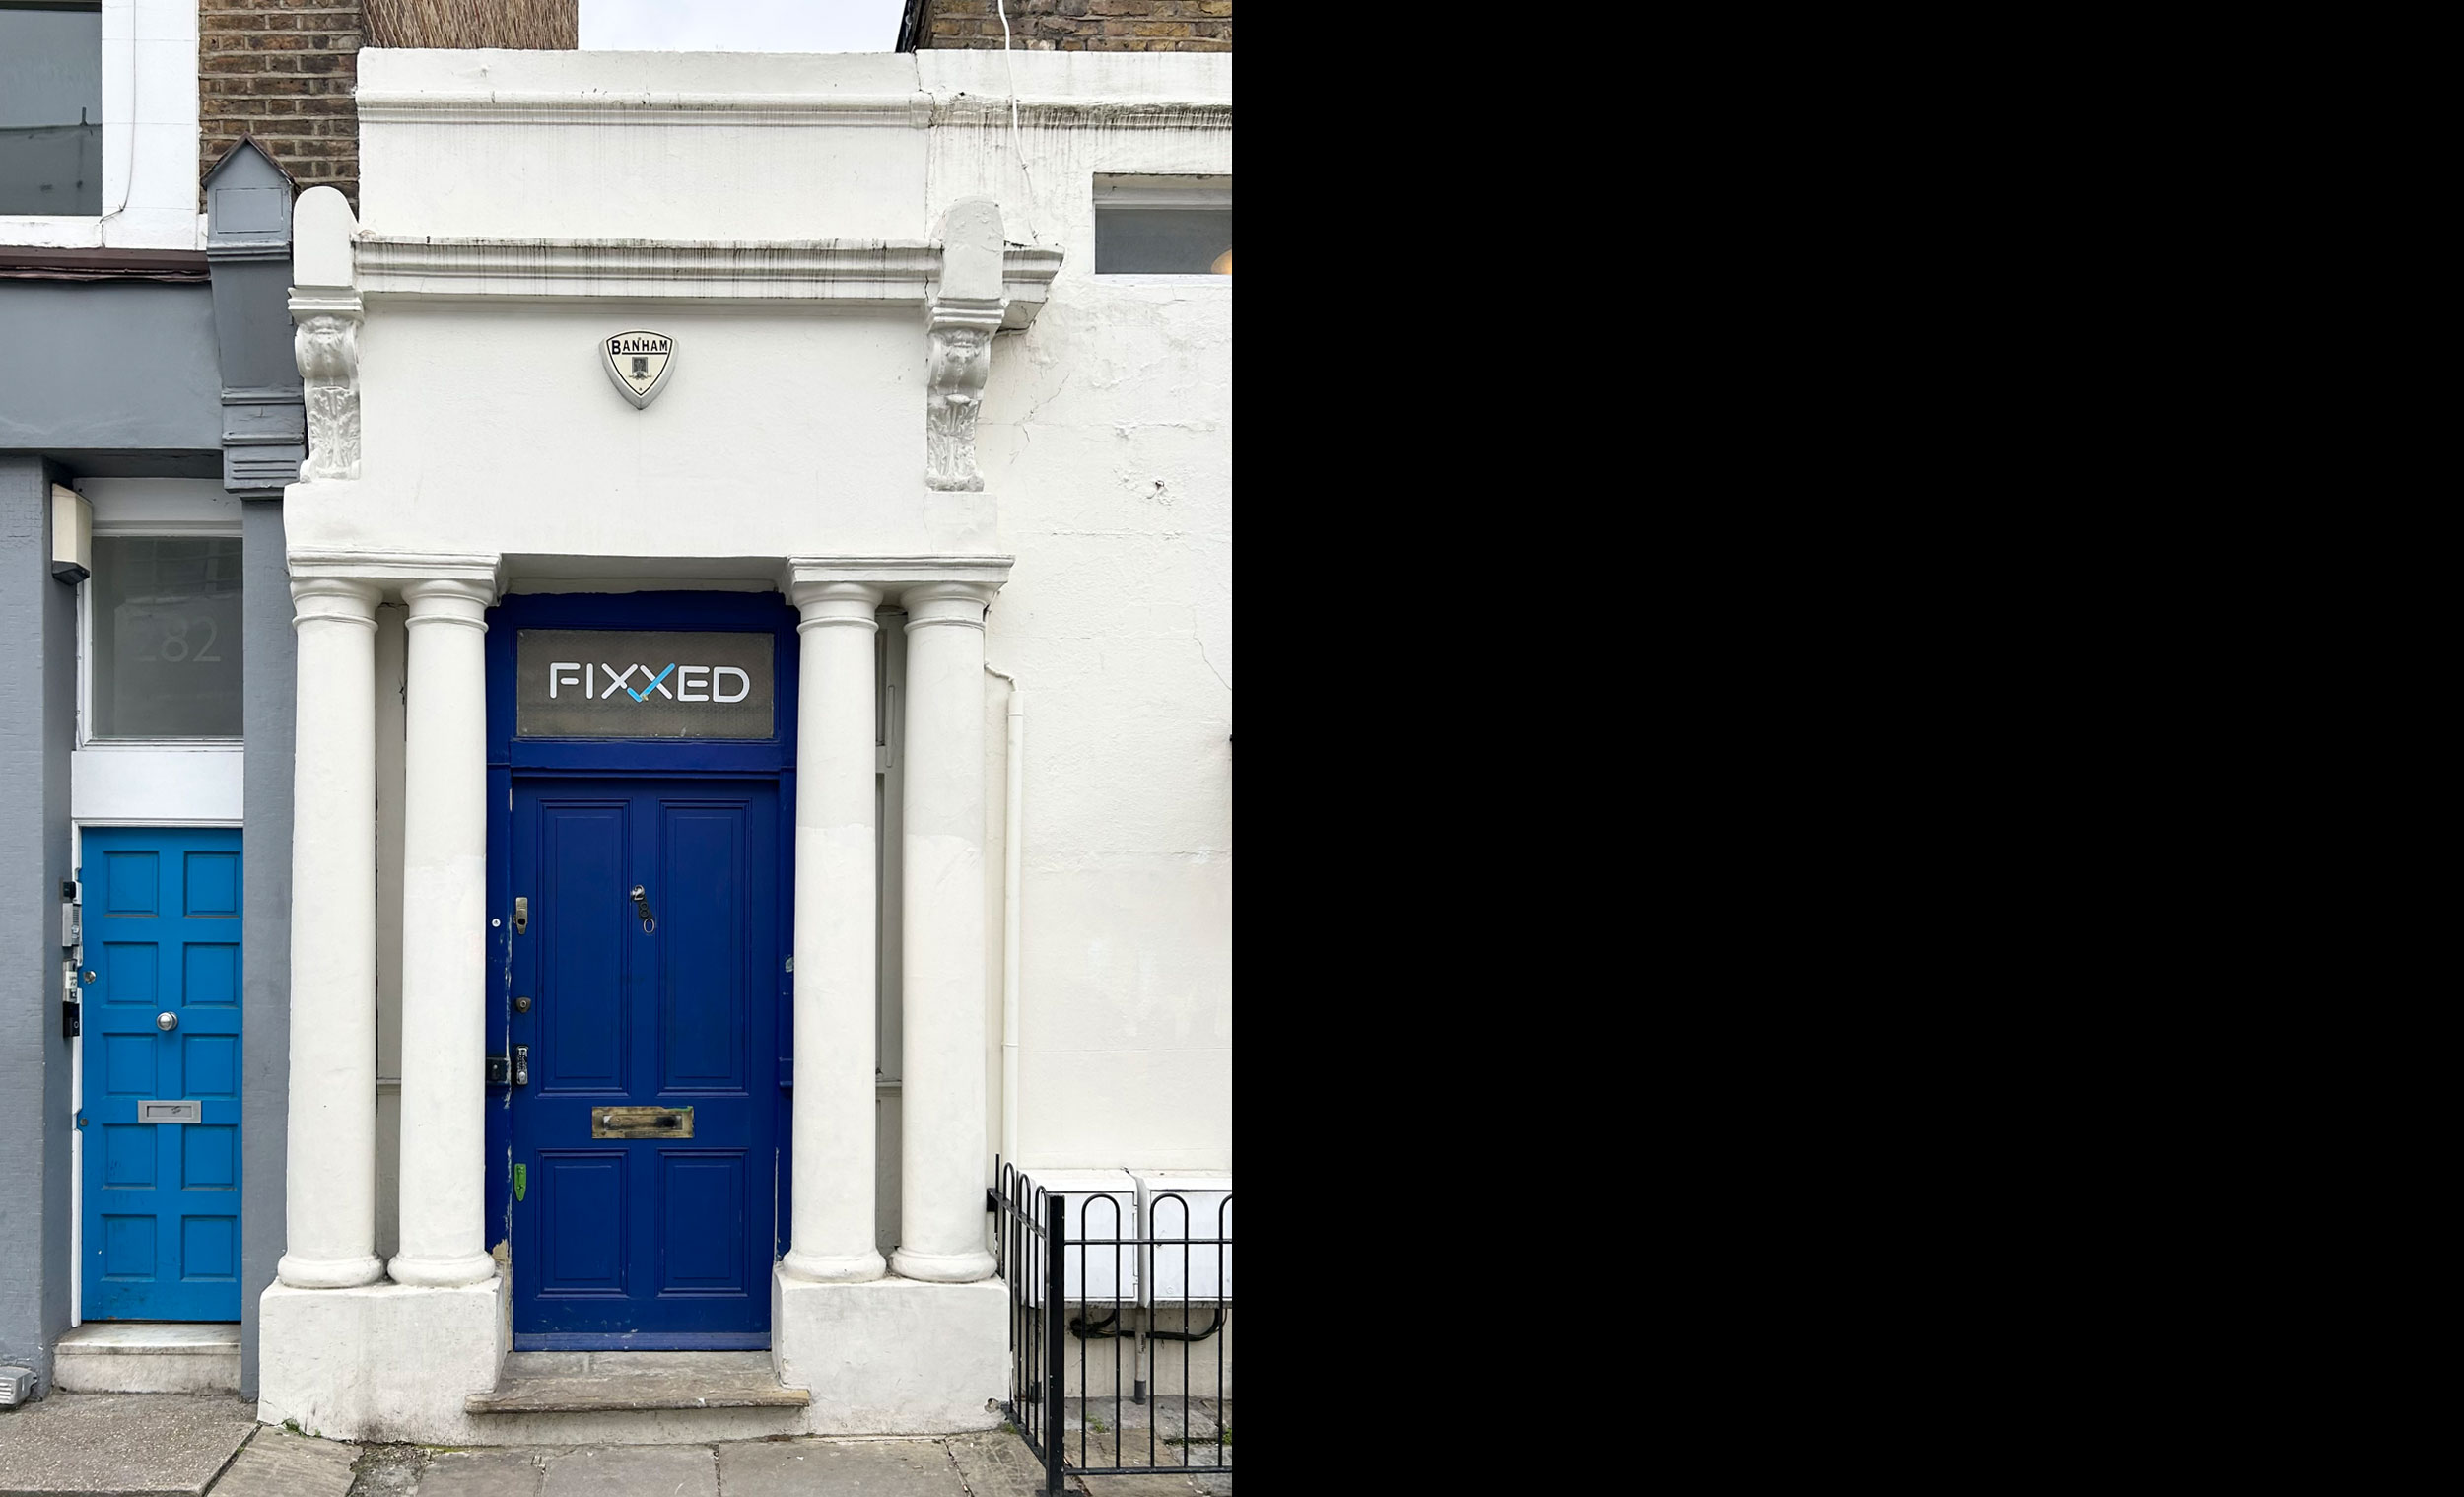 In Notting Hill (1999) the famous house with the blue door was